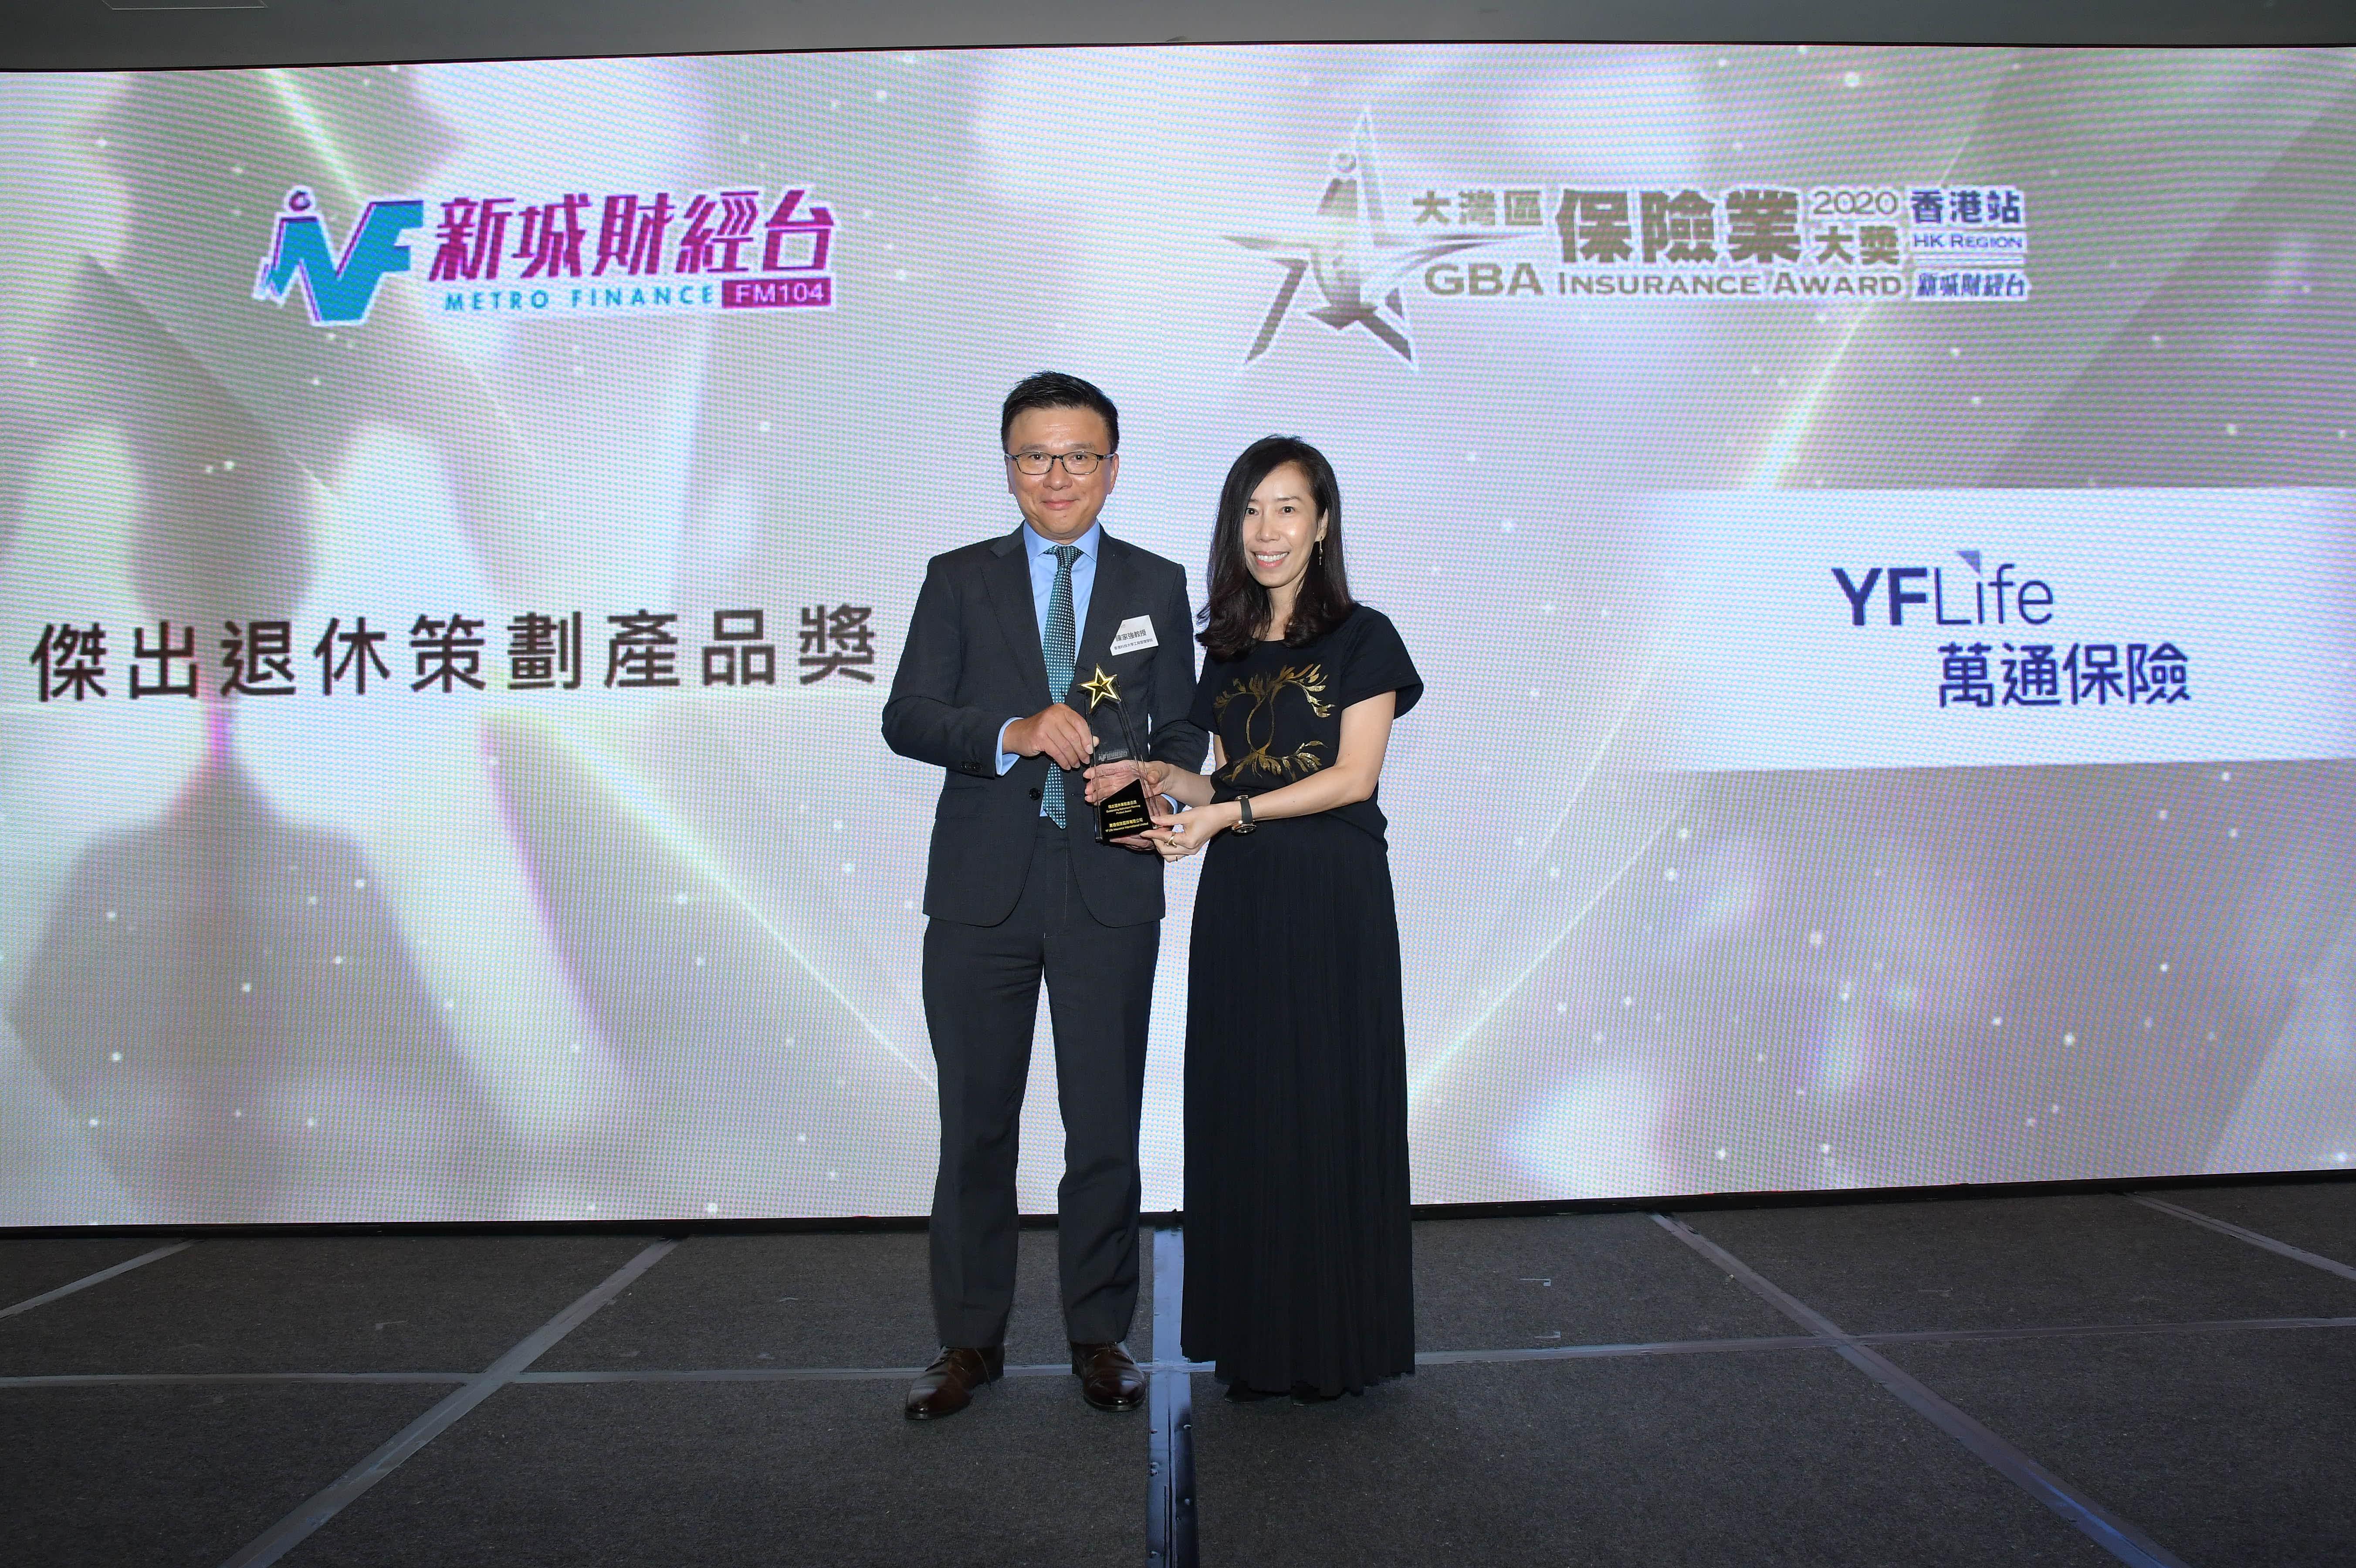 Ms. Jeanne Sau, YF Life's Chief Marketing Officer, receives the "Outstanding Retirement Planning Product Award” on the Company's behalf. 